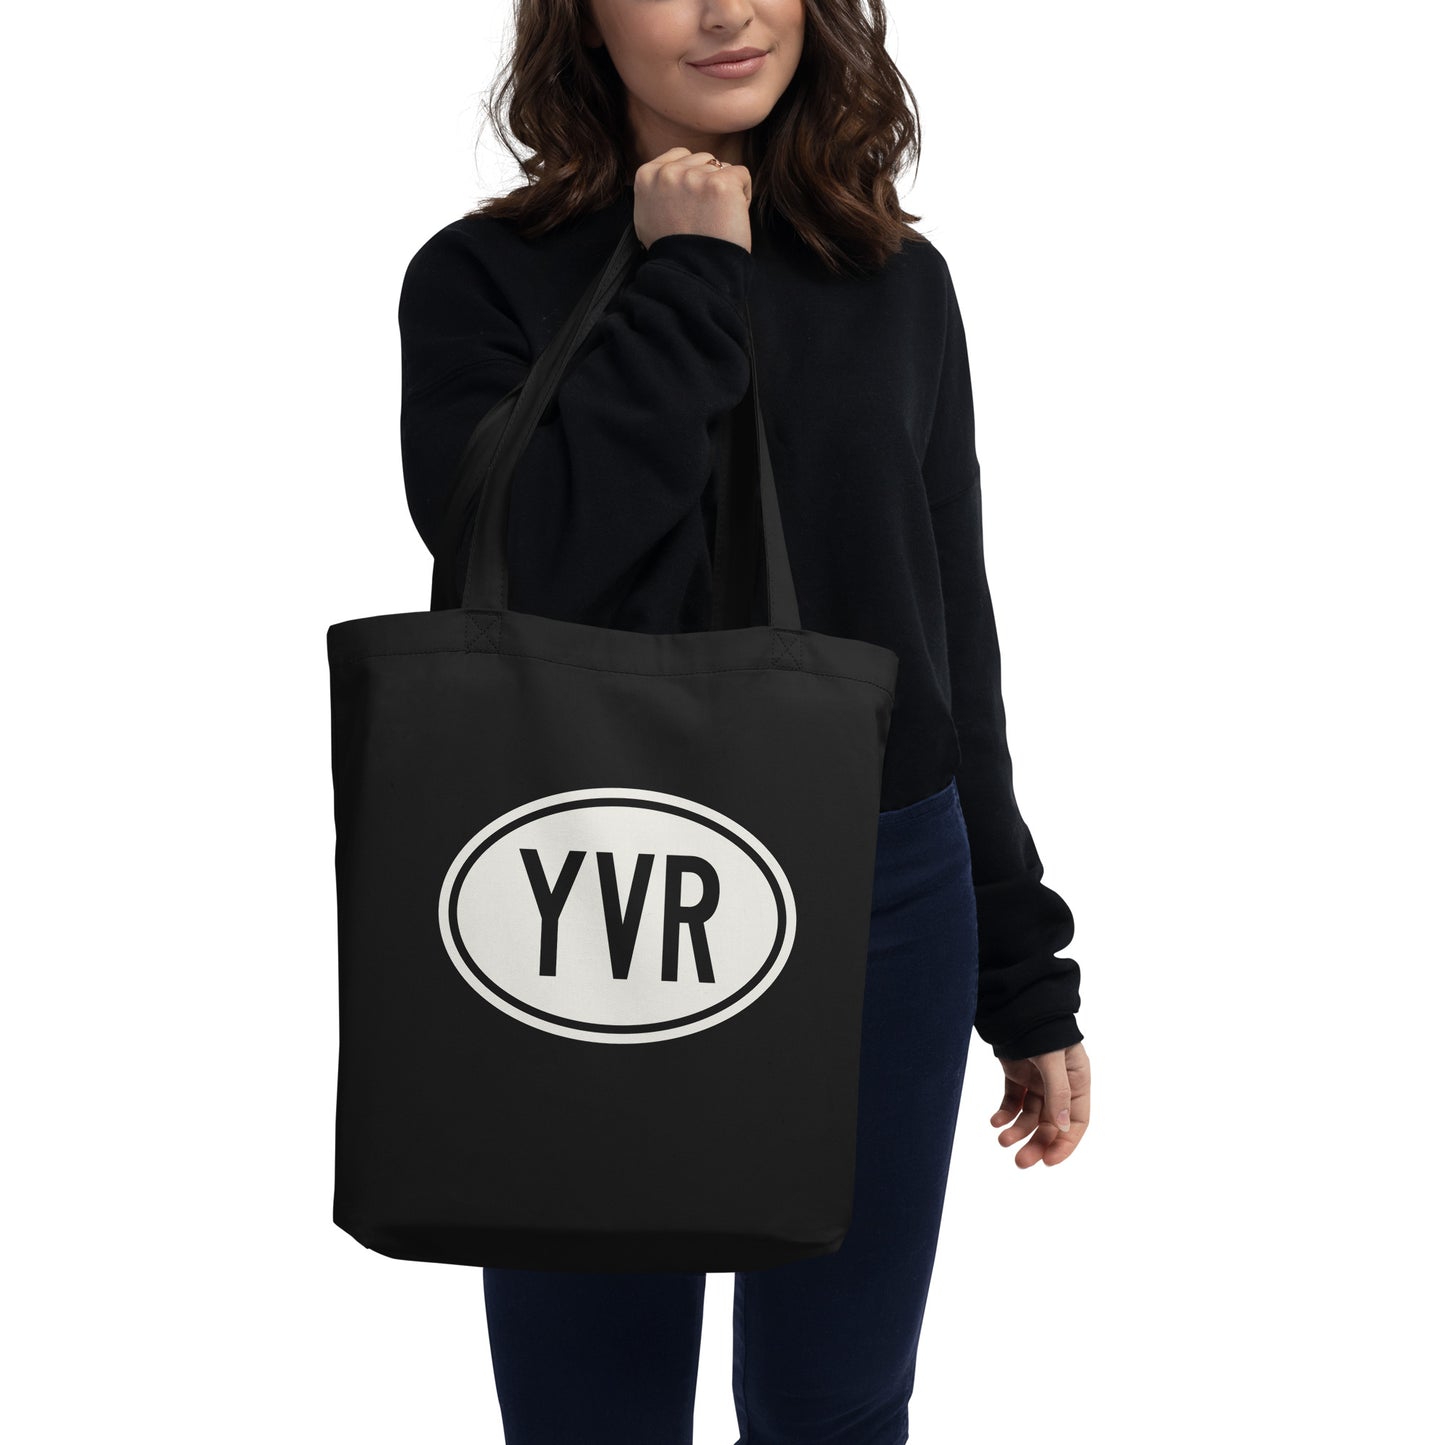 Unique Travel Gift Organic Tote - White Oval • YVR Vancouver • YHM Designs - Image 03